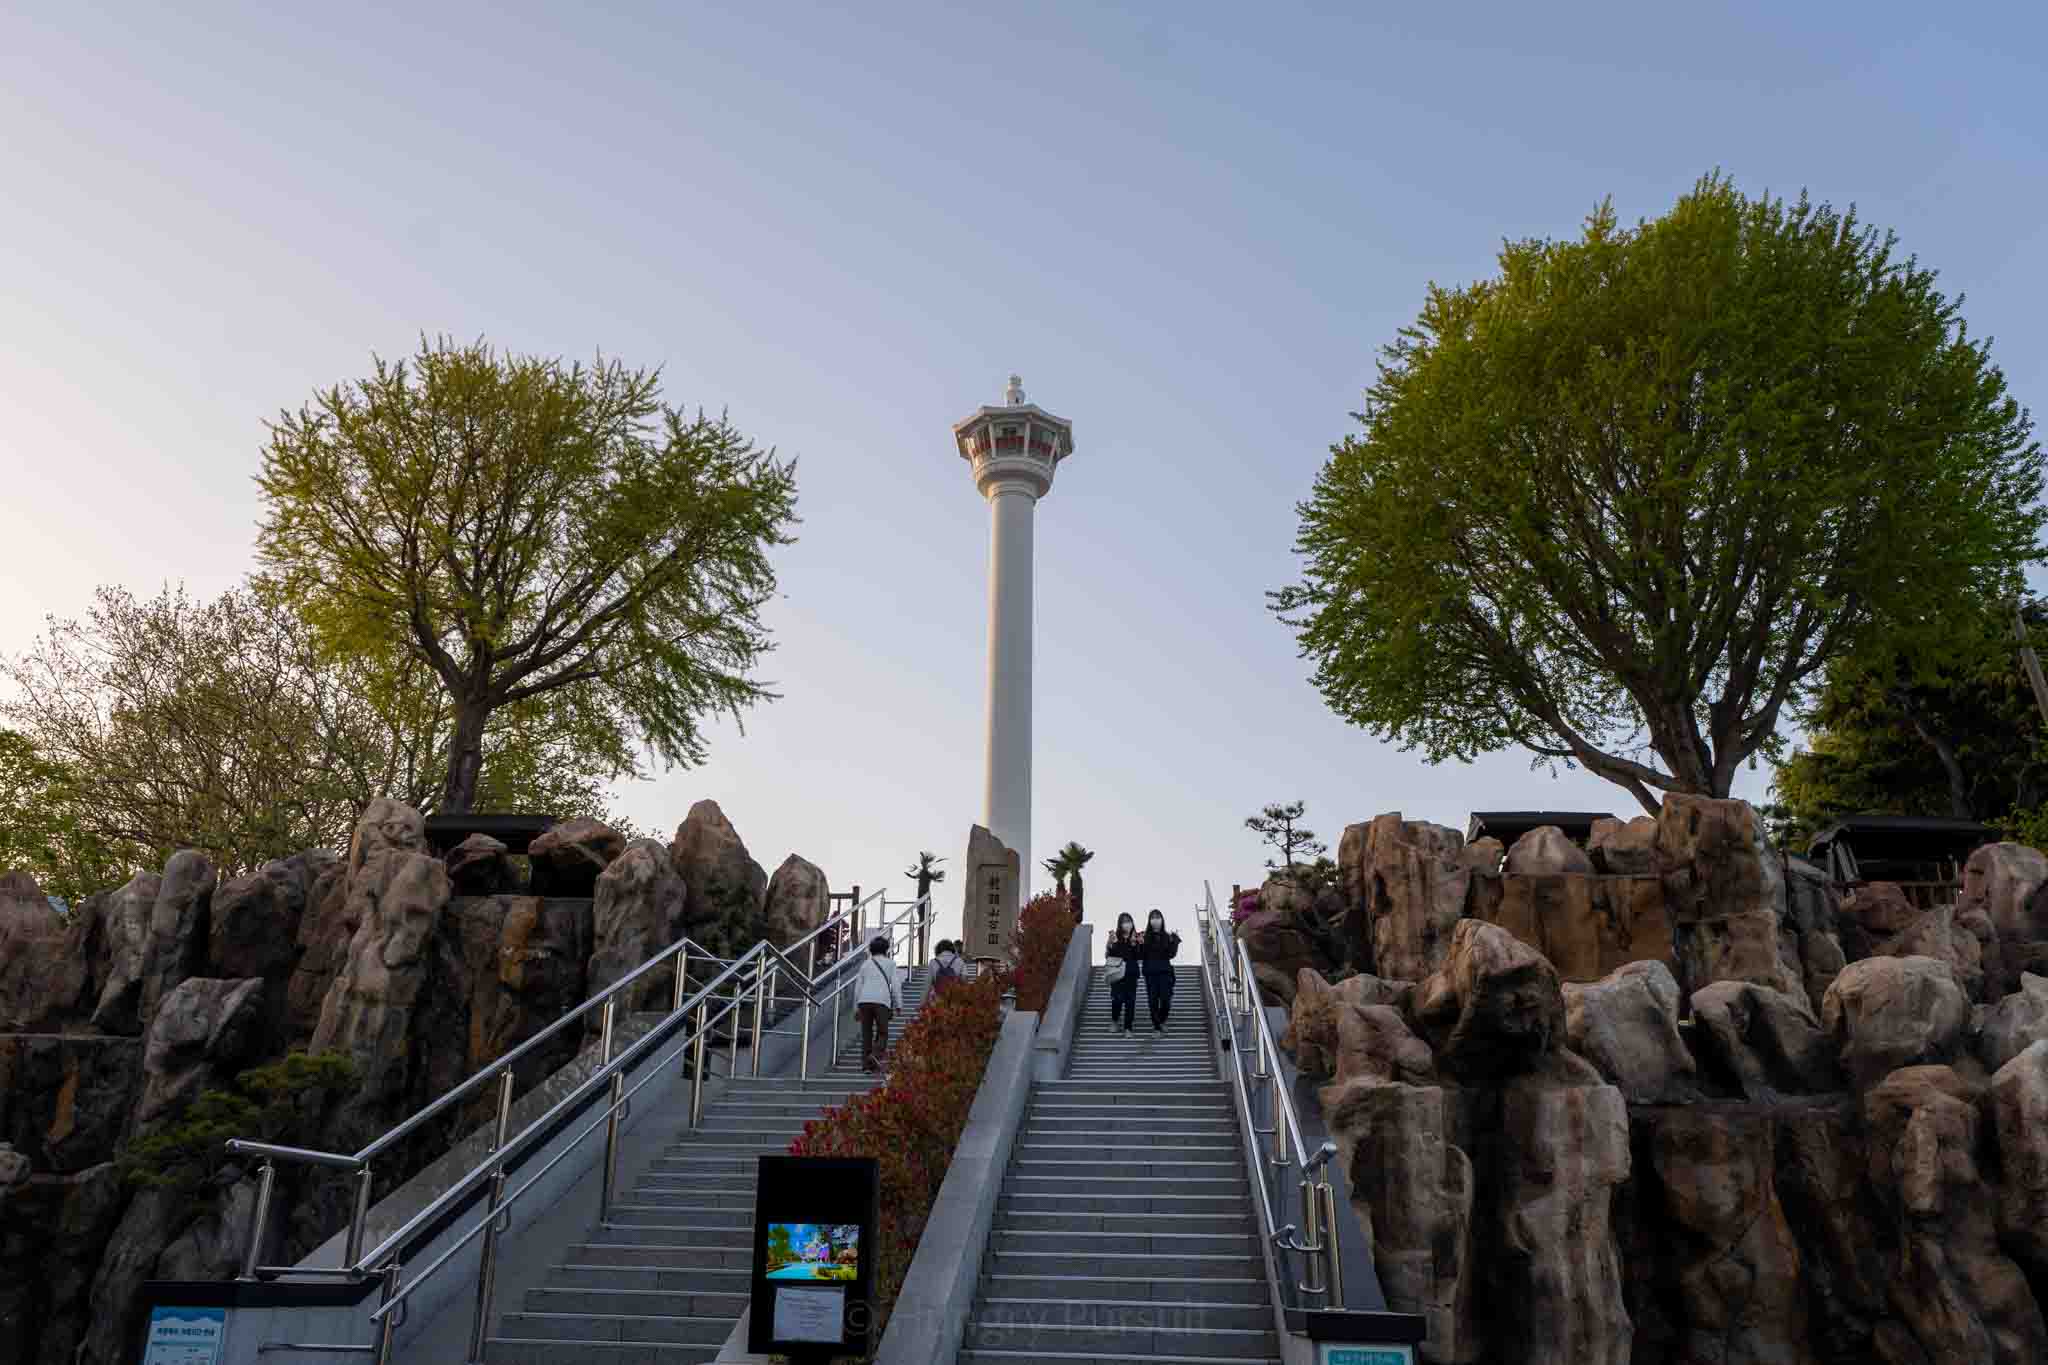 View of the Busan Tower from the base of the stairs with tourists taking photos